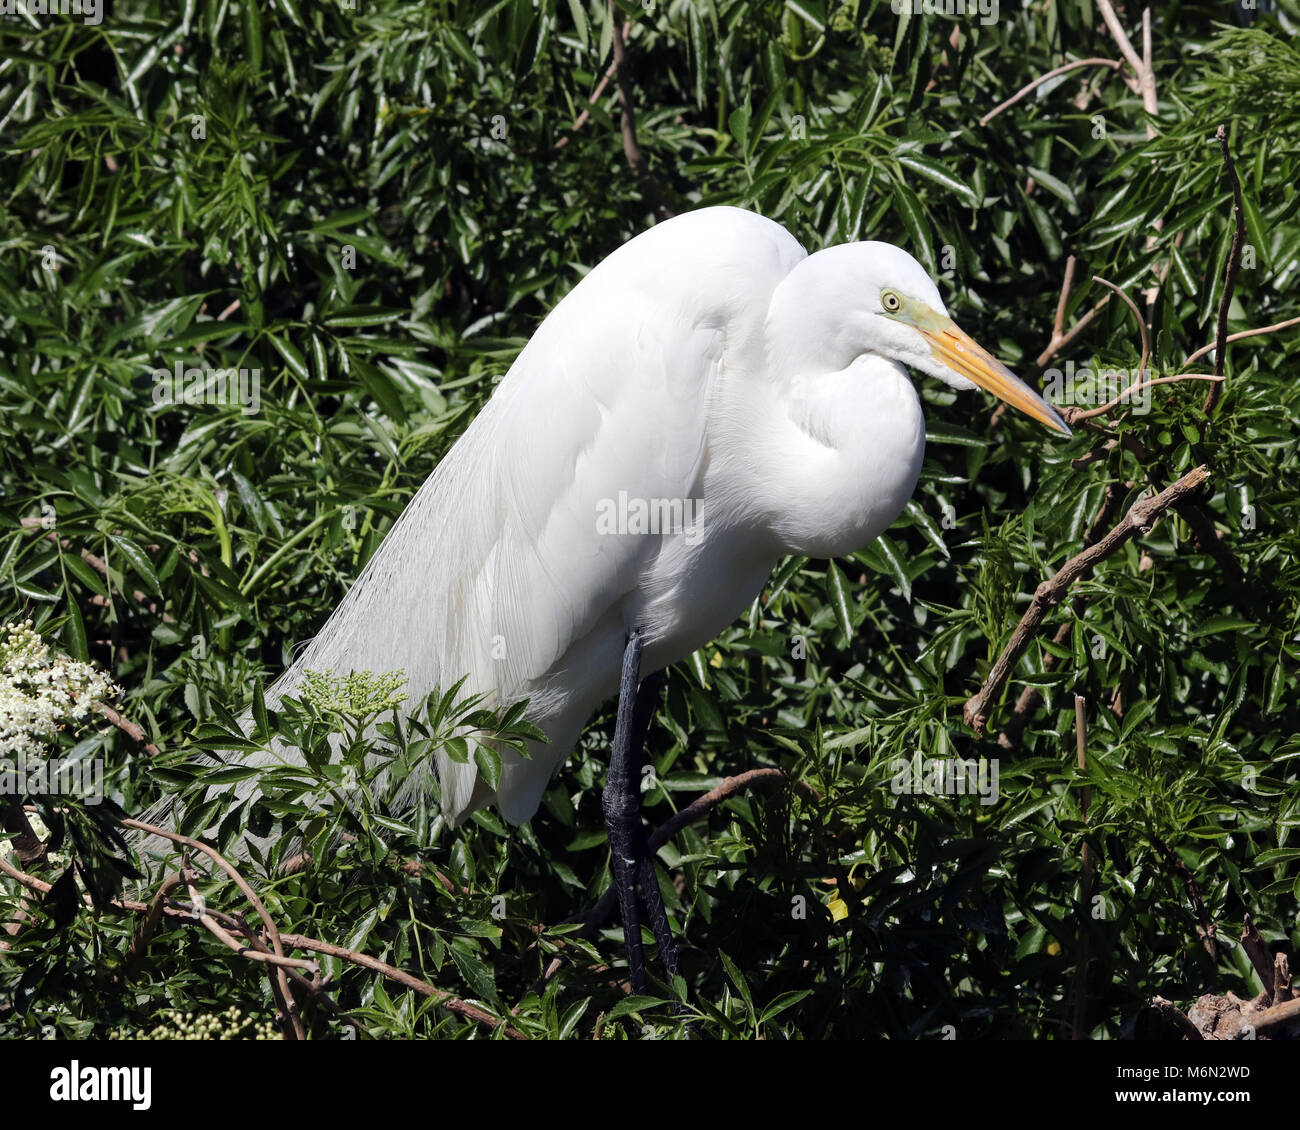 The Great Egret develops long white plumage and a green patch between it's eye and beak during breeding season. Stock Photo